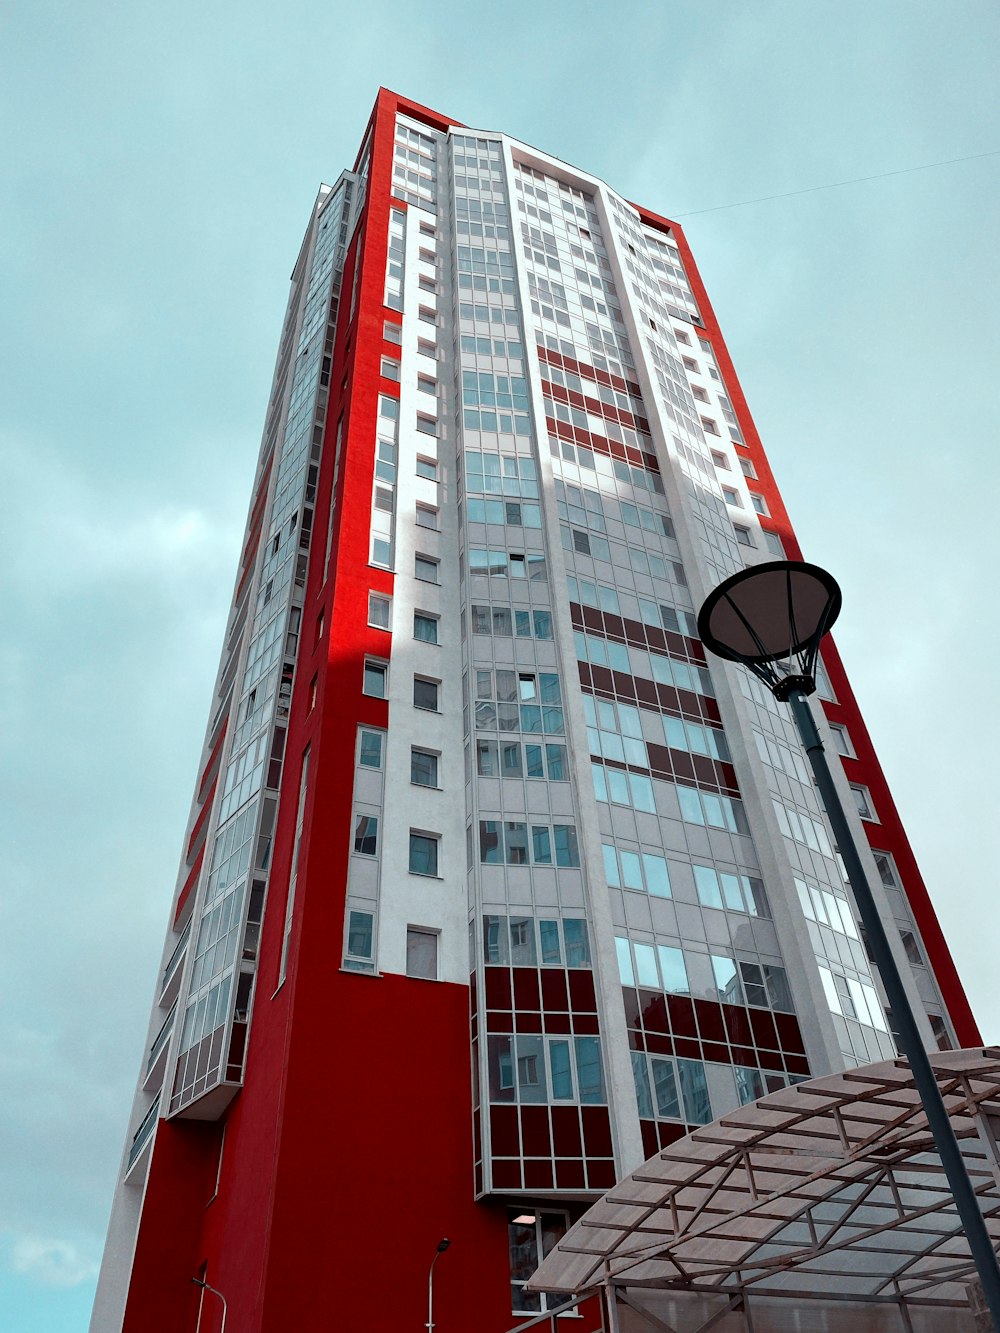 a tall red and white building next to a street light